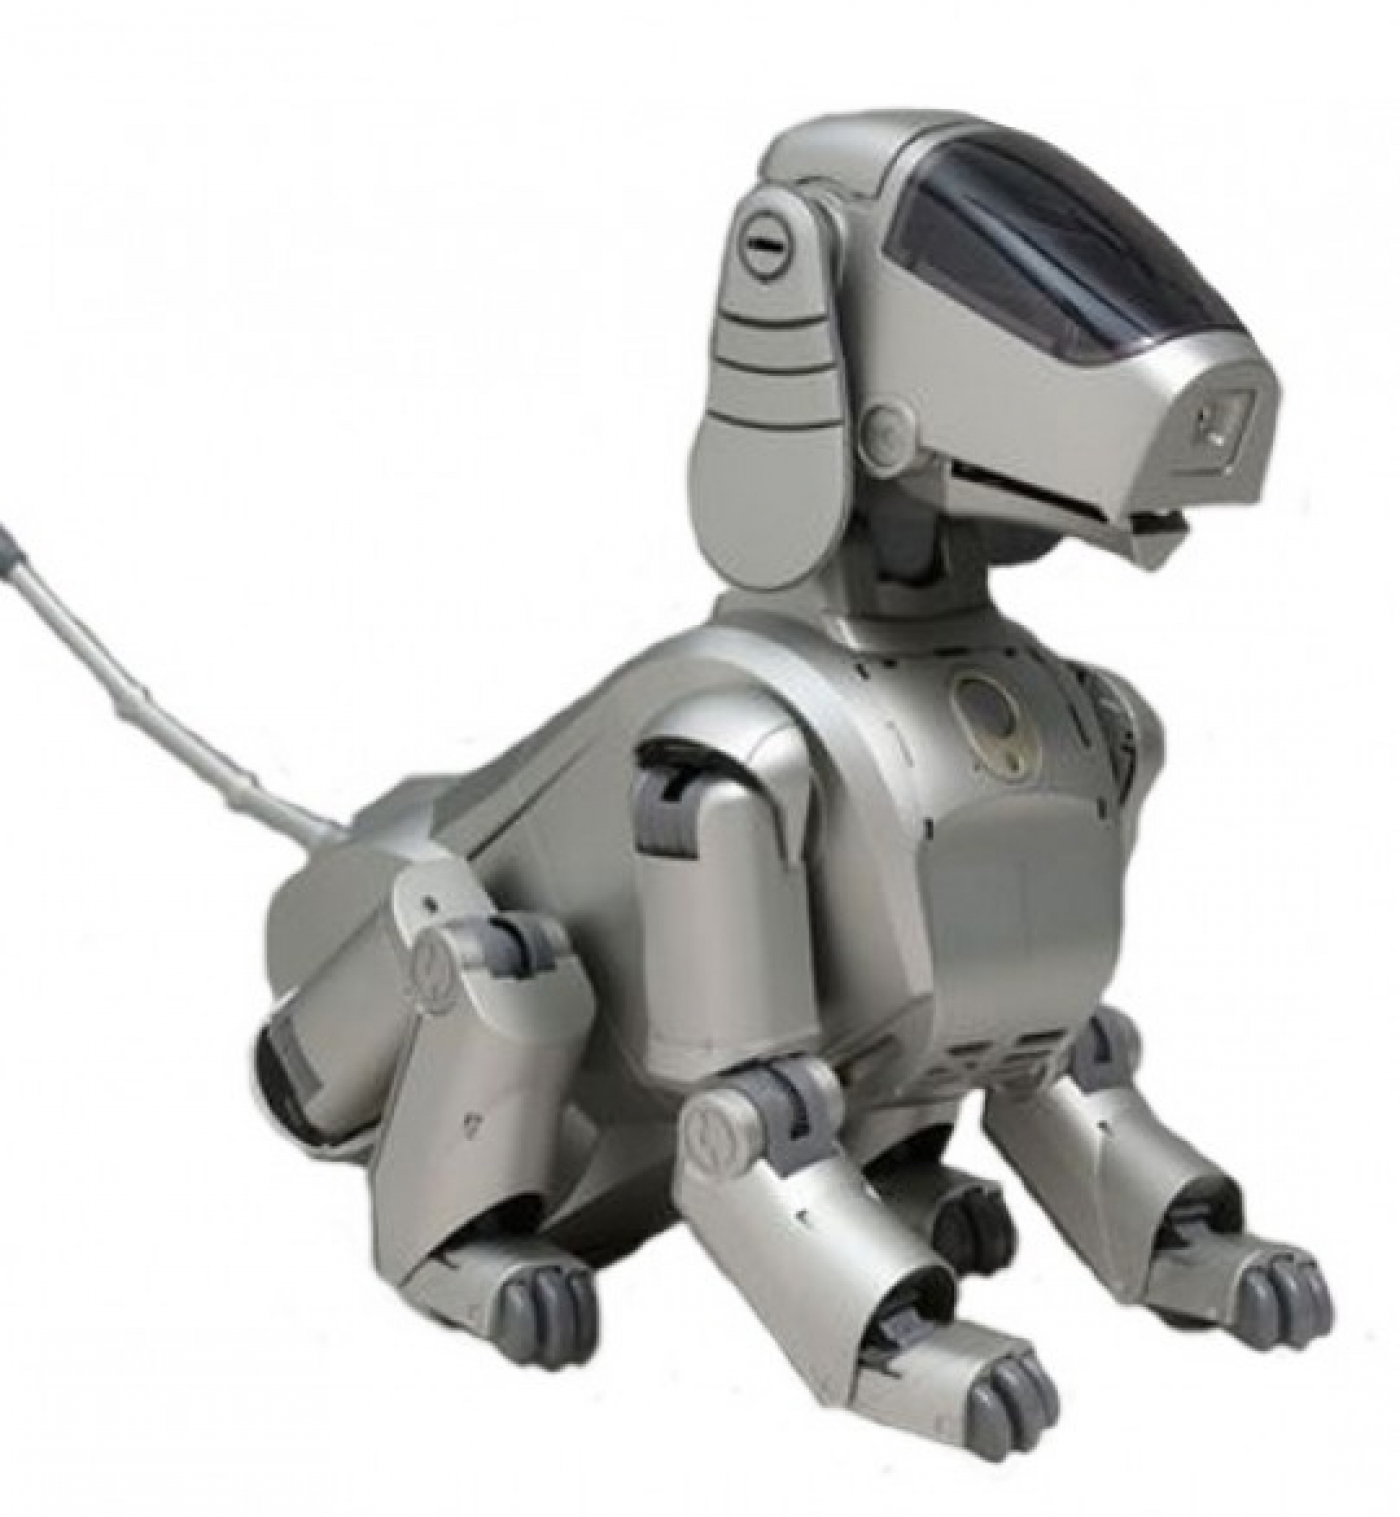 The Sony Aibo ERS-110